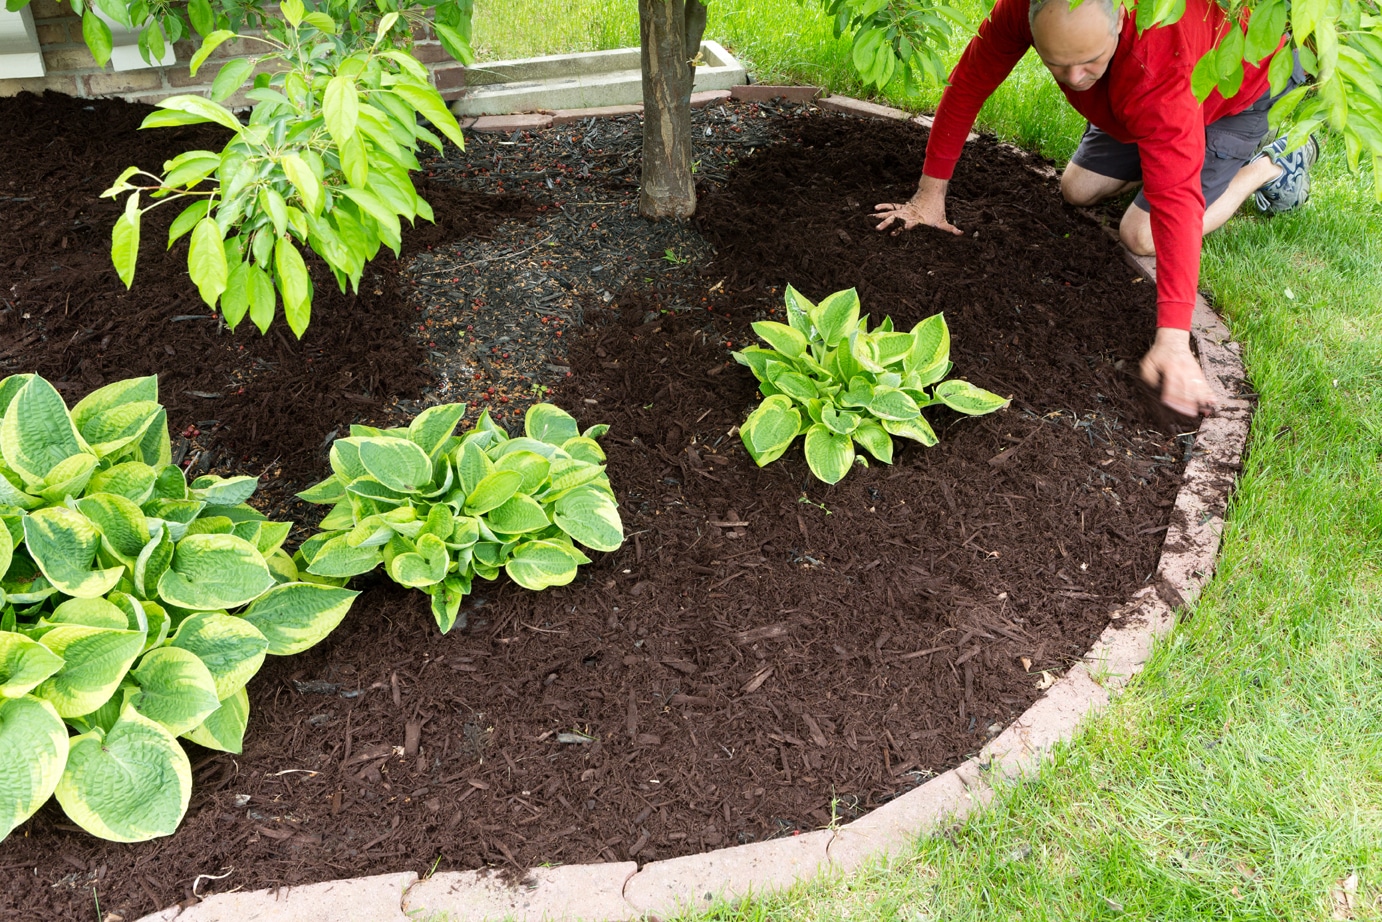 How To Fix a Flower Bed Full Of Weeds - Ryno Lawn Care, LLC